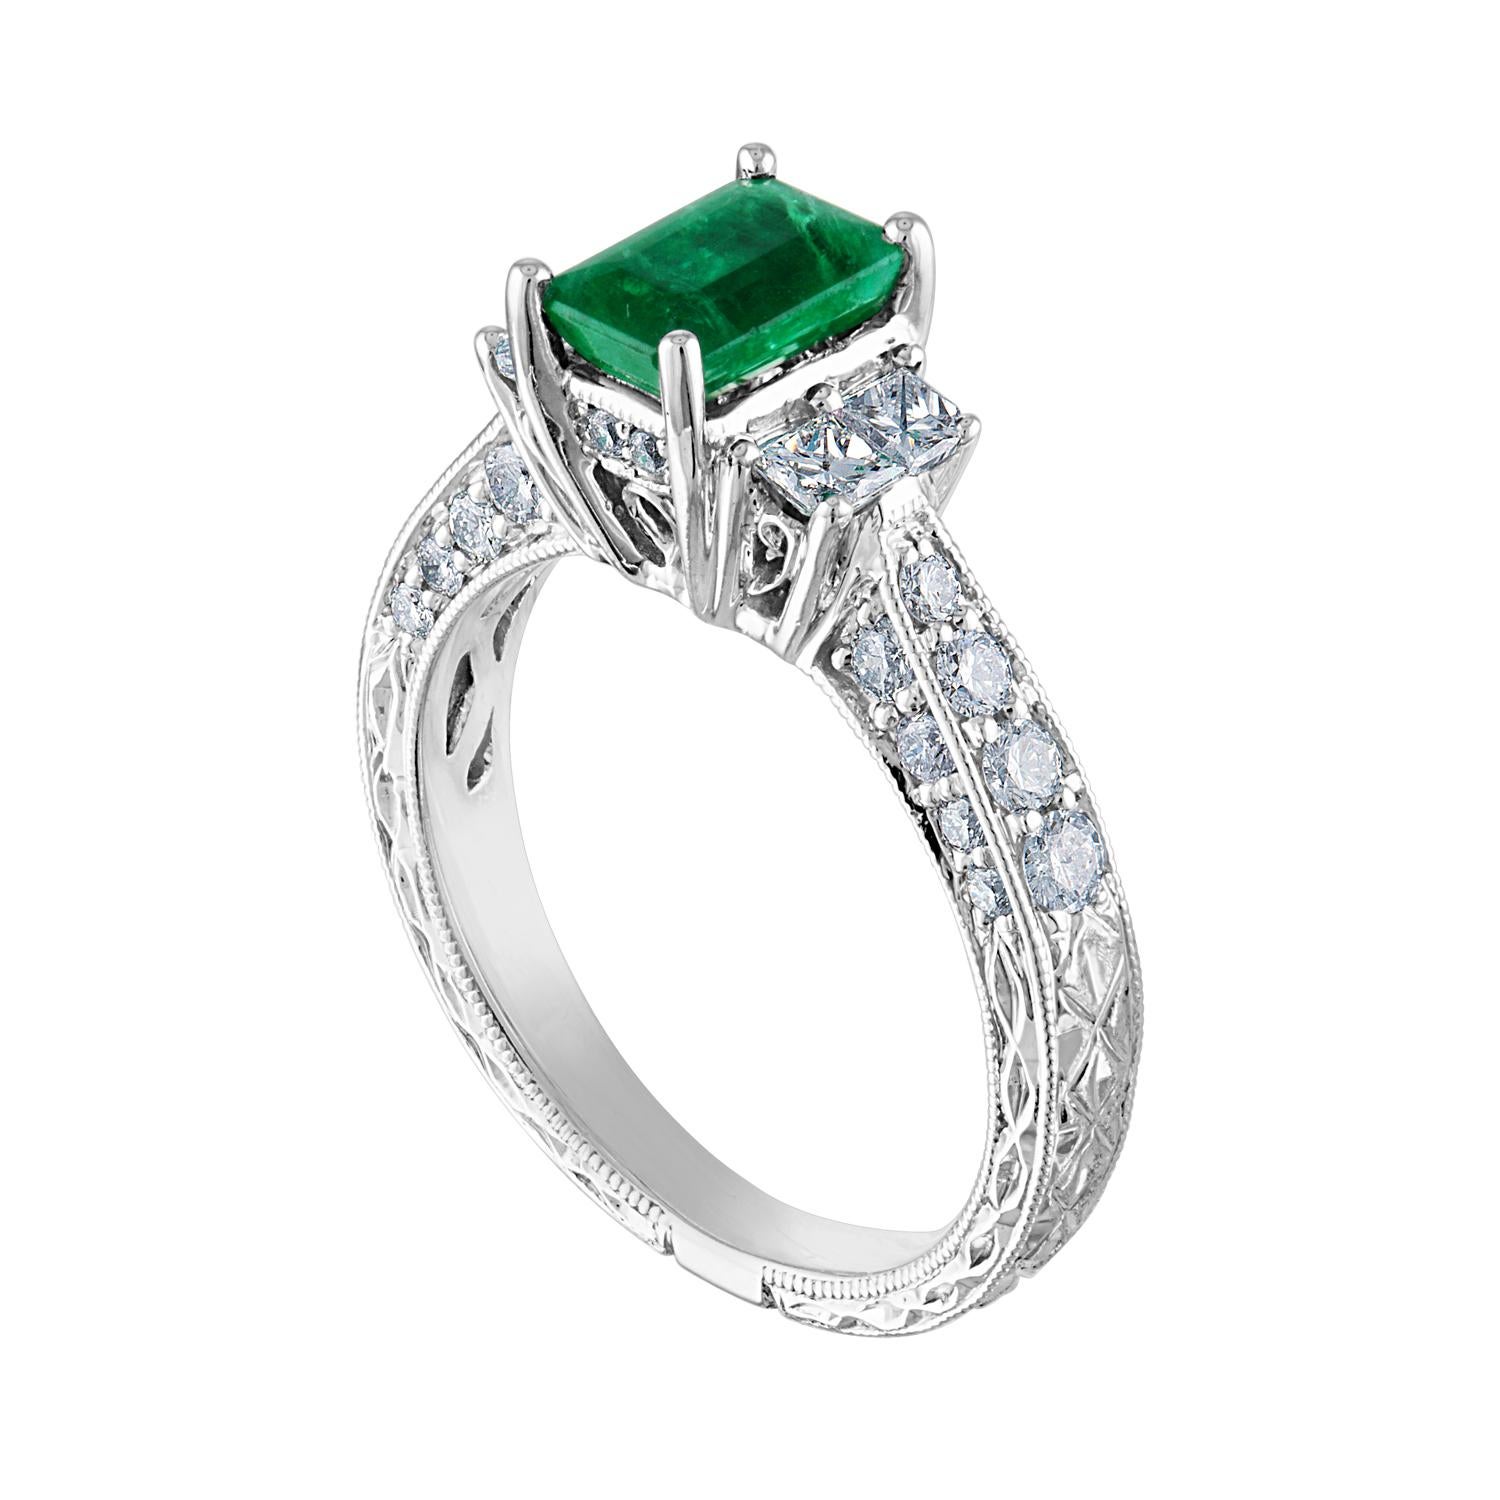 Beautifully Milgrain and Filigree Emerald Ring
The ring is 18K White Gold
The Center Stone is 0.89 Carats
The Emerald is AGL Certified
There are 1.00 Carats In Round Diamonds F/G VS/SI
The ring is a size 6.00, sizable.
The ring weighs 5.4 grams